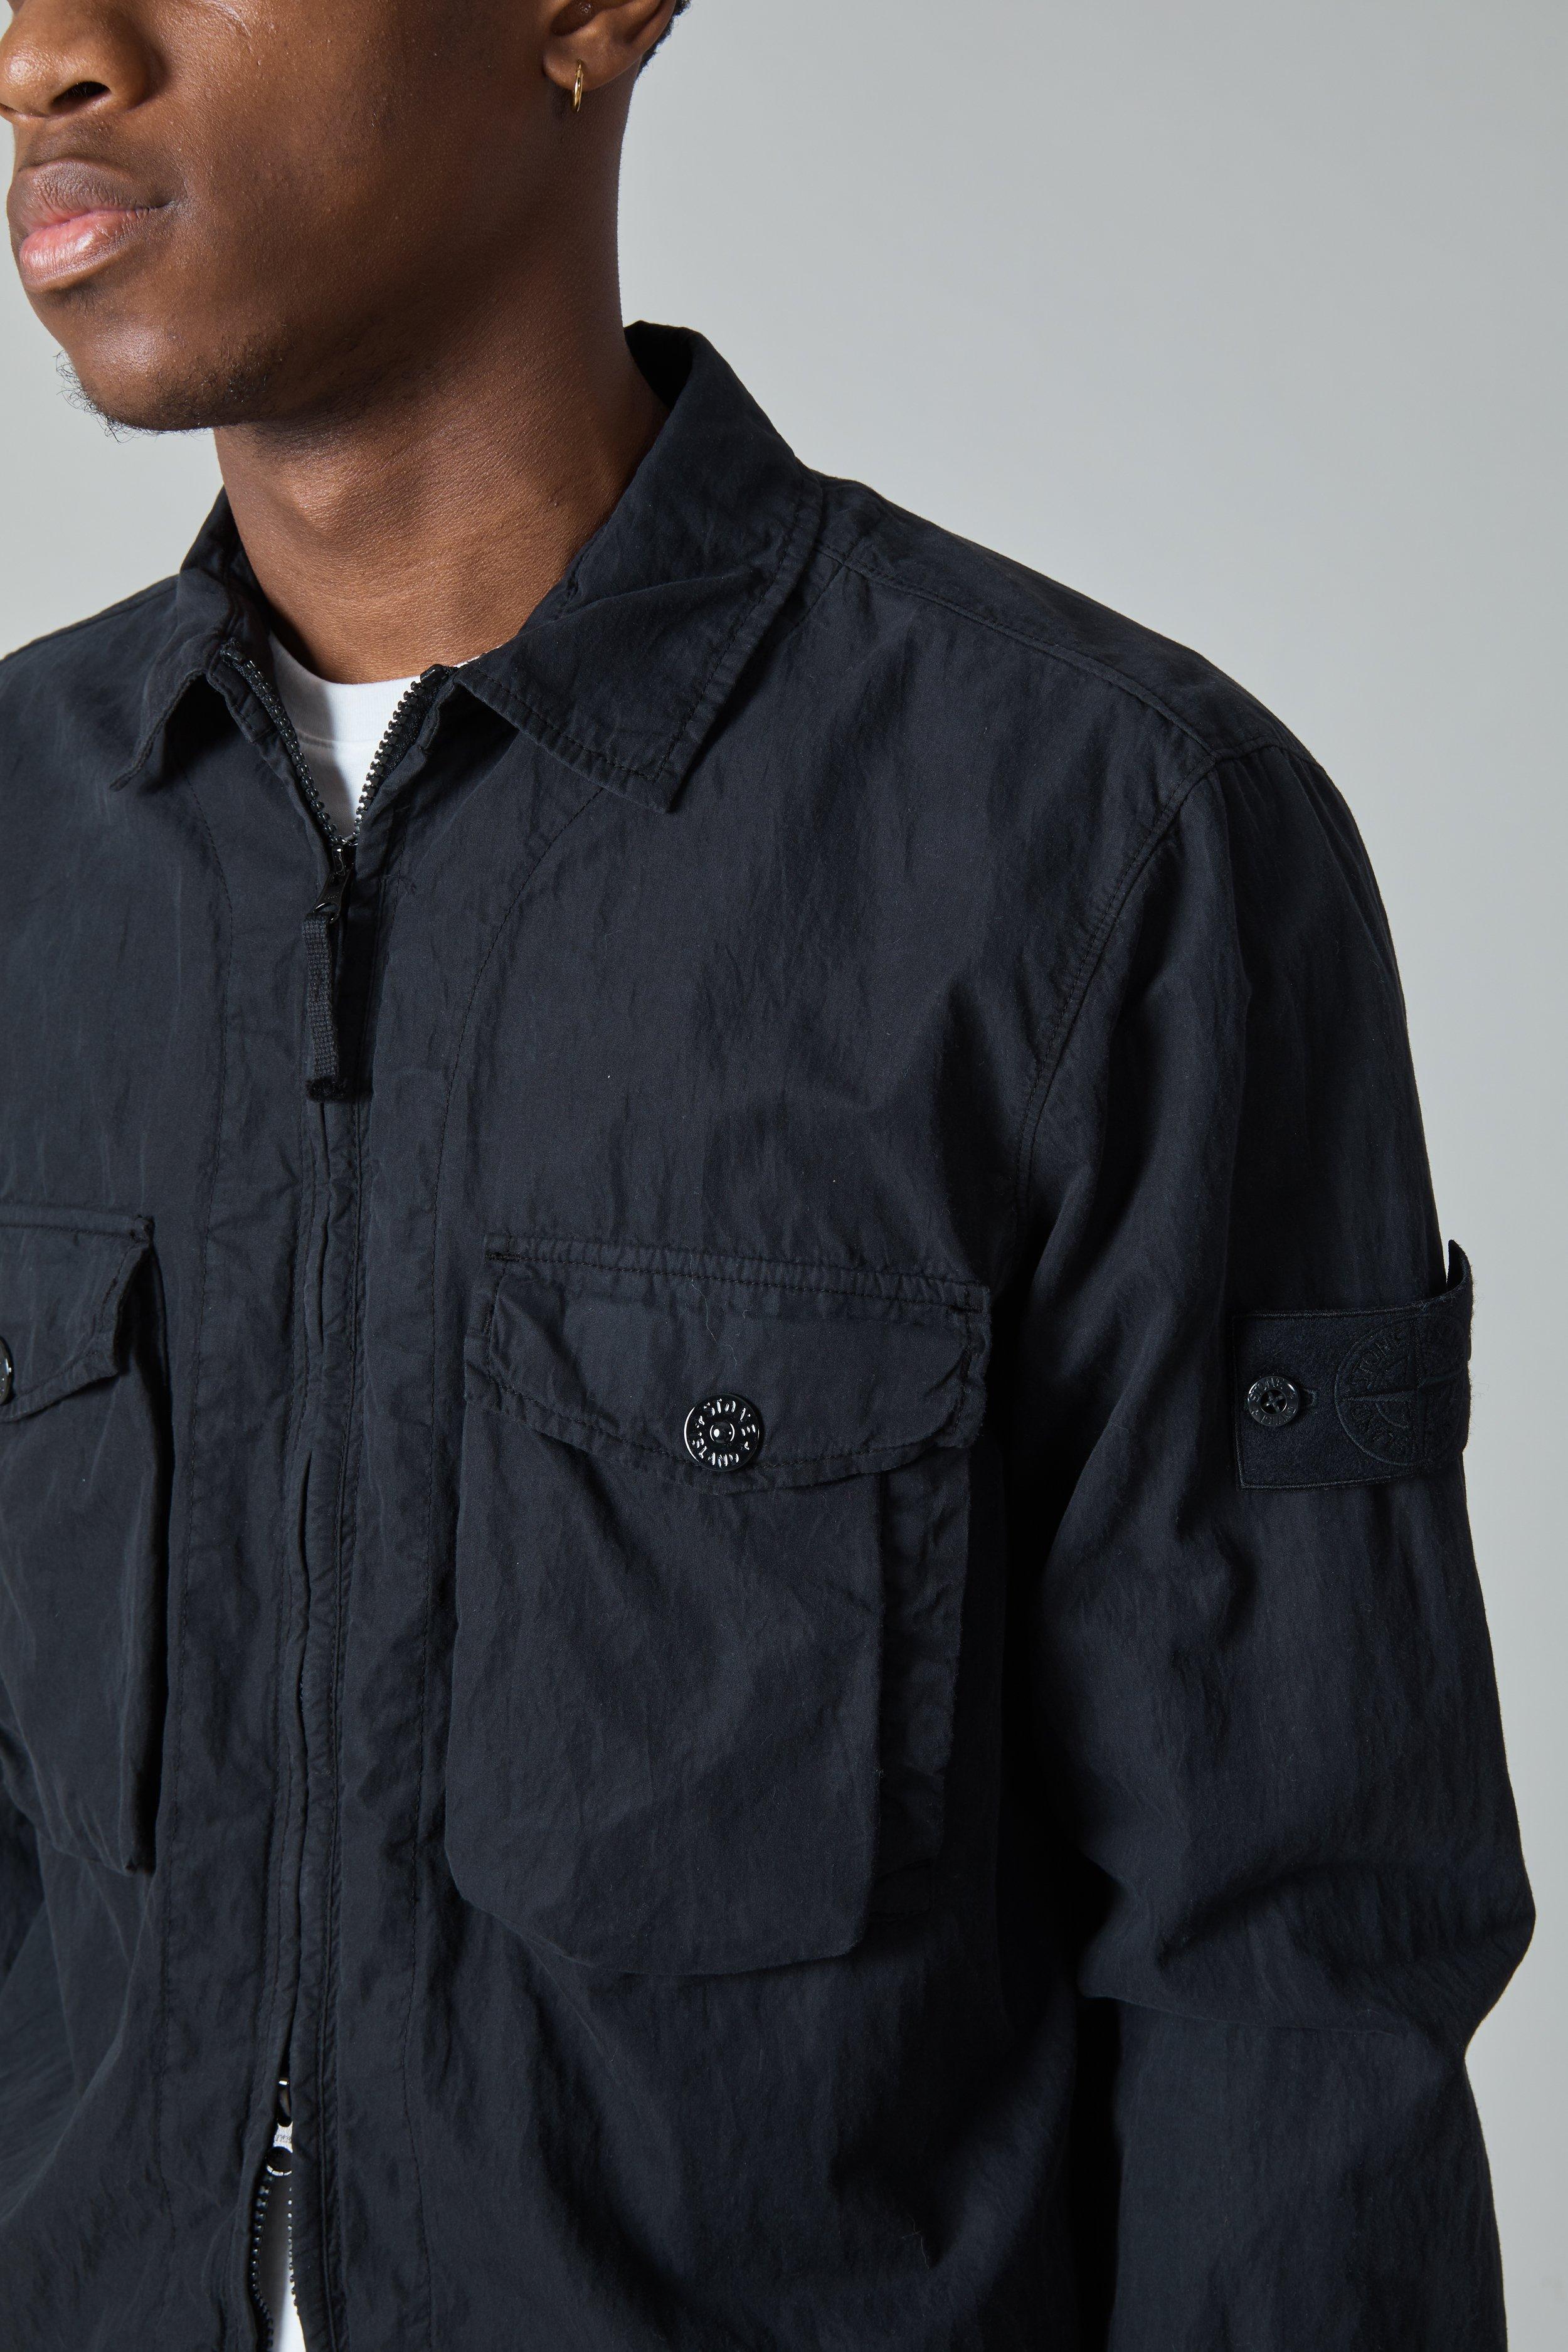 Purchase > stone island ghost overshirt navy, Up to 65% OFF